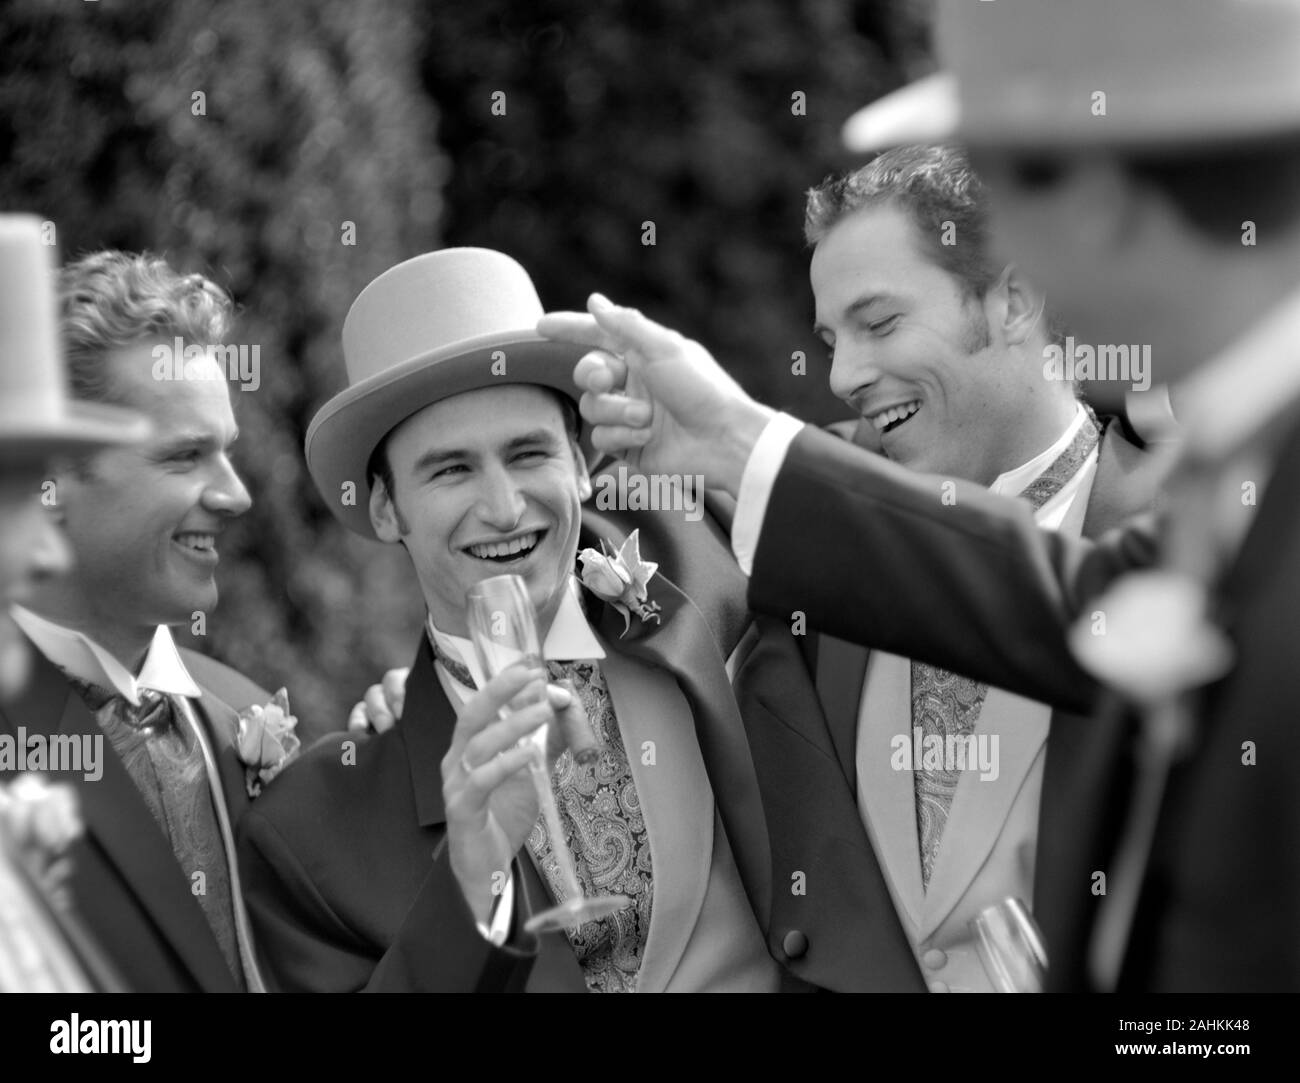 A bunch of friends are wishing a bridegroom. Stock Photo